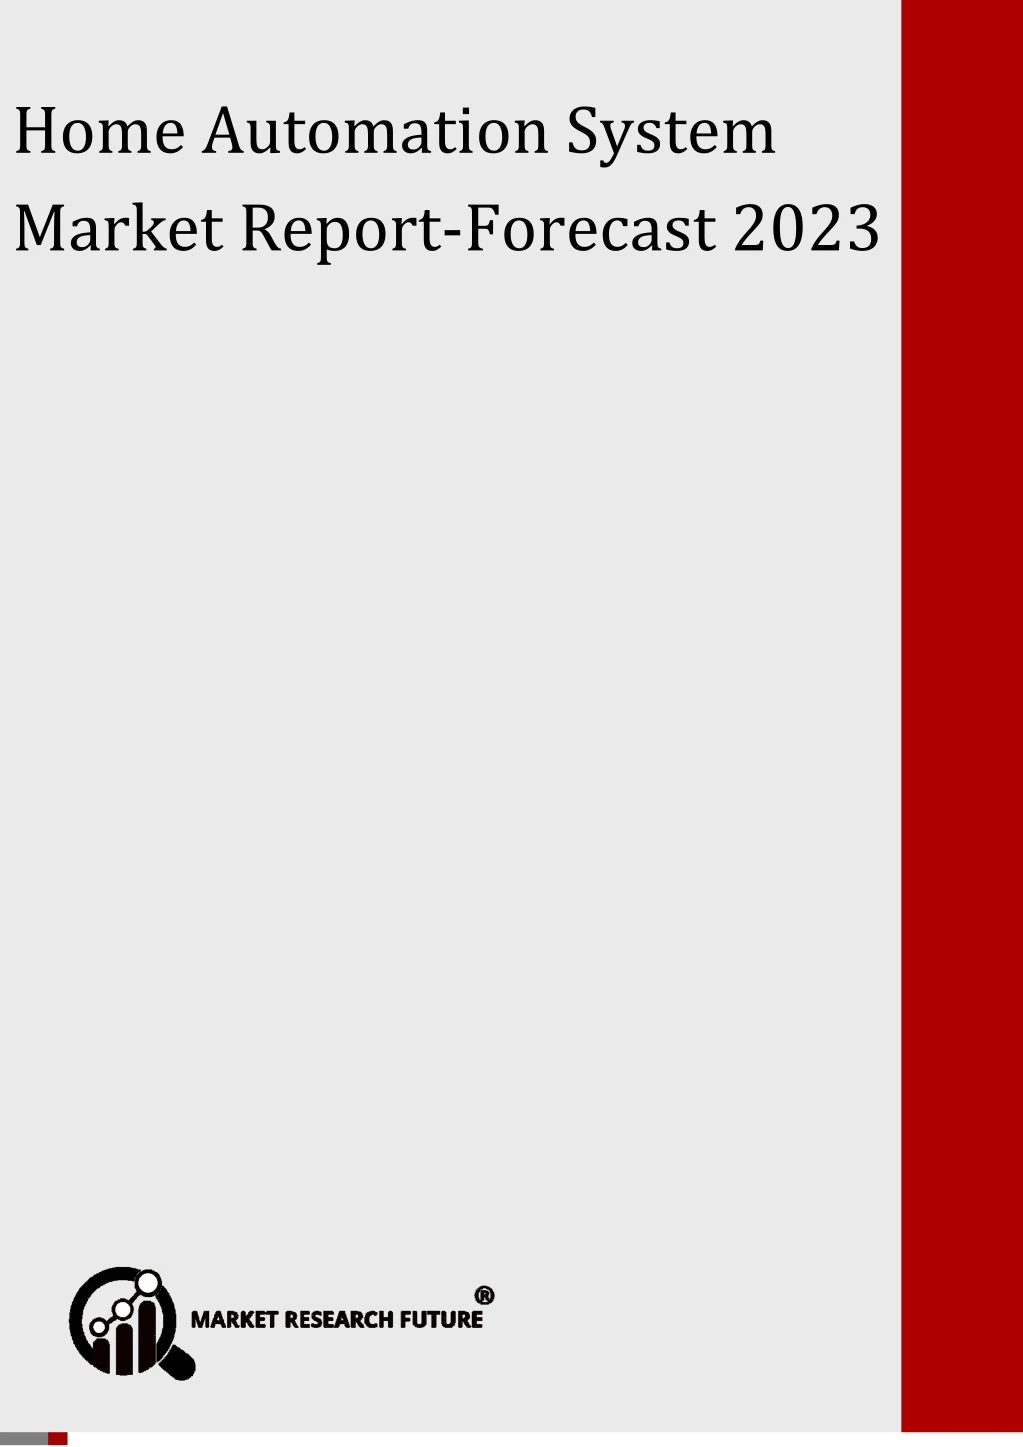 global home automation system market forecast